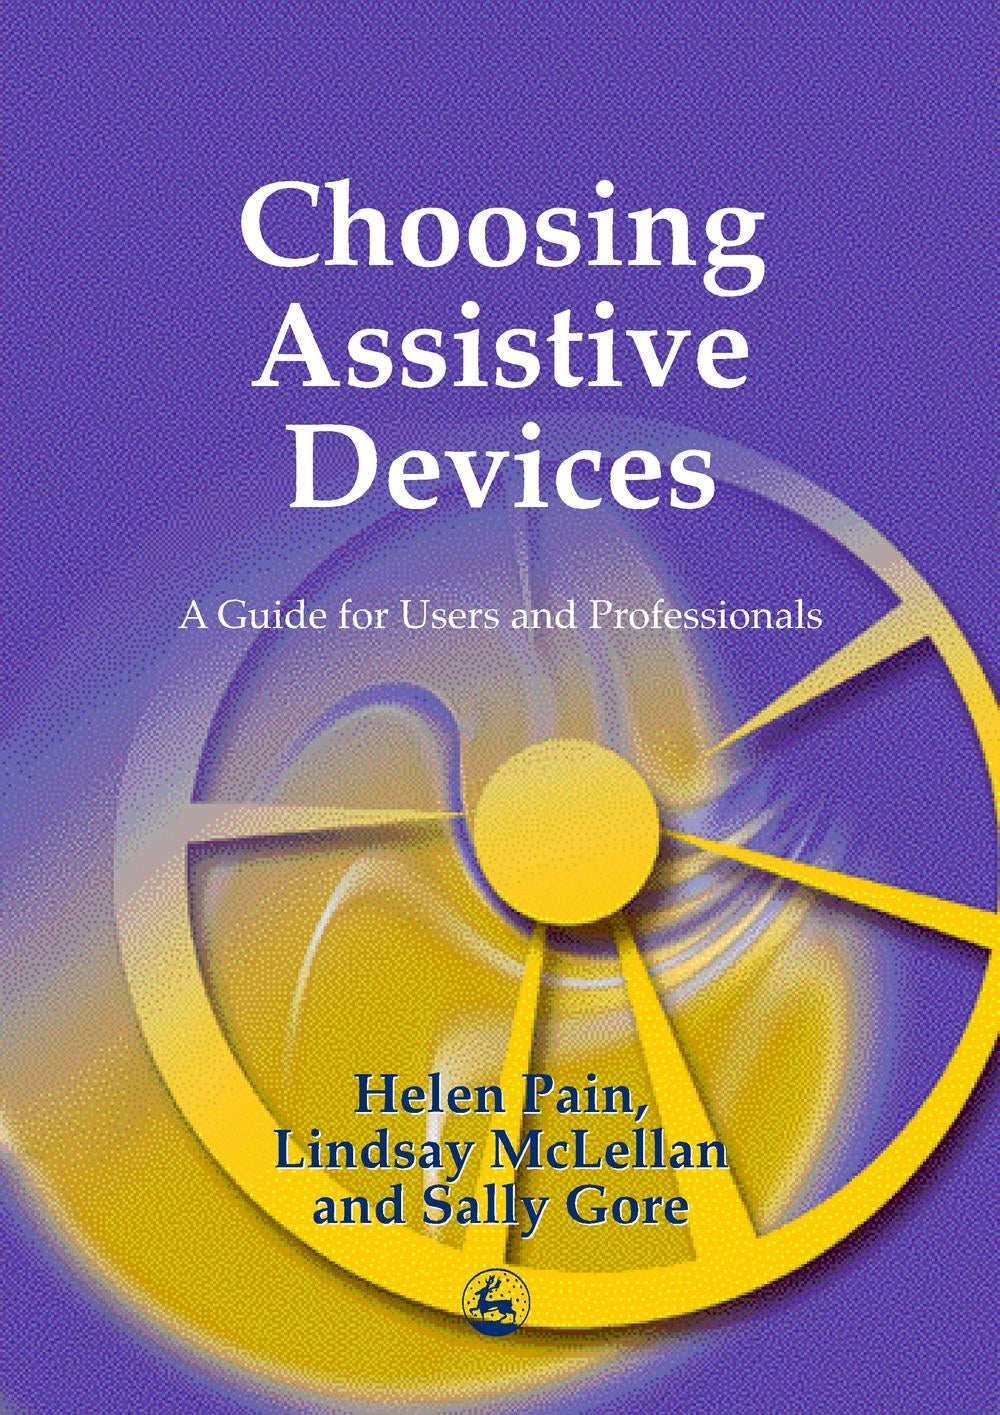 Choosing Assistive Devices by Helen Pain, Sally Gore, D Lindsay McLellan